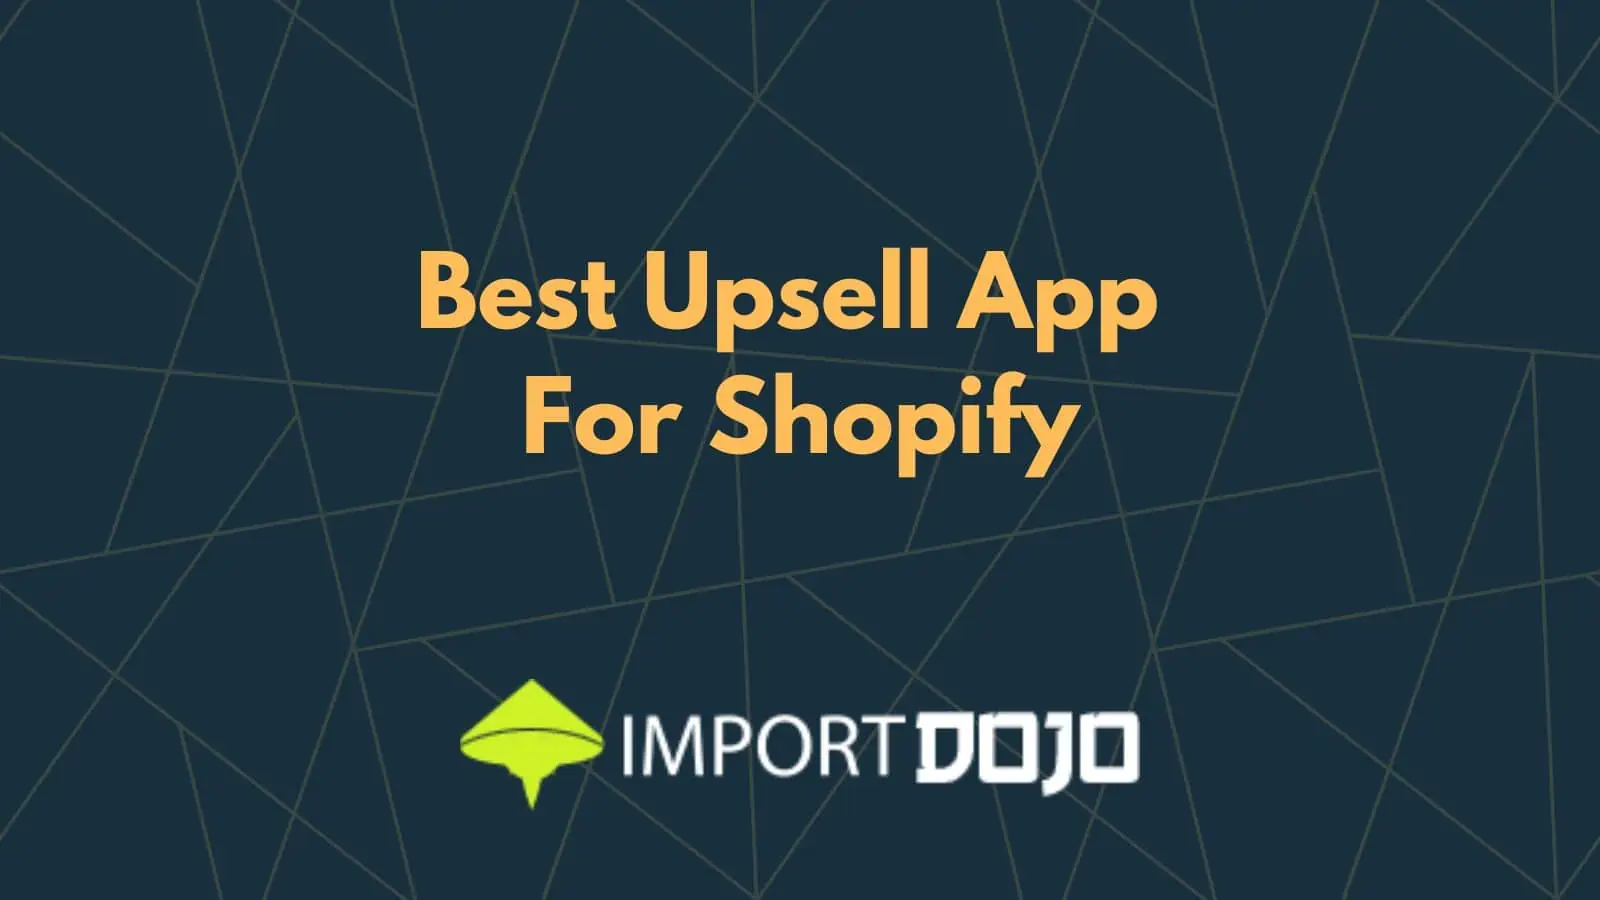 Best Upsell App For Shopify